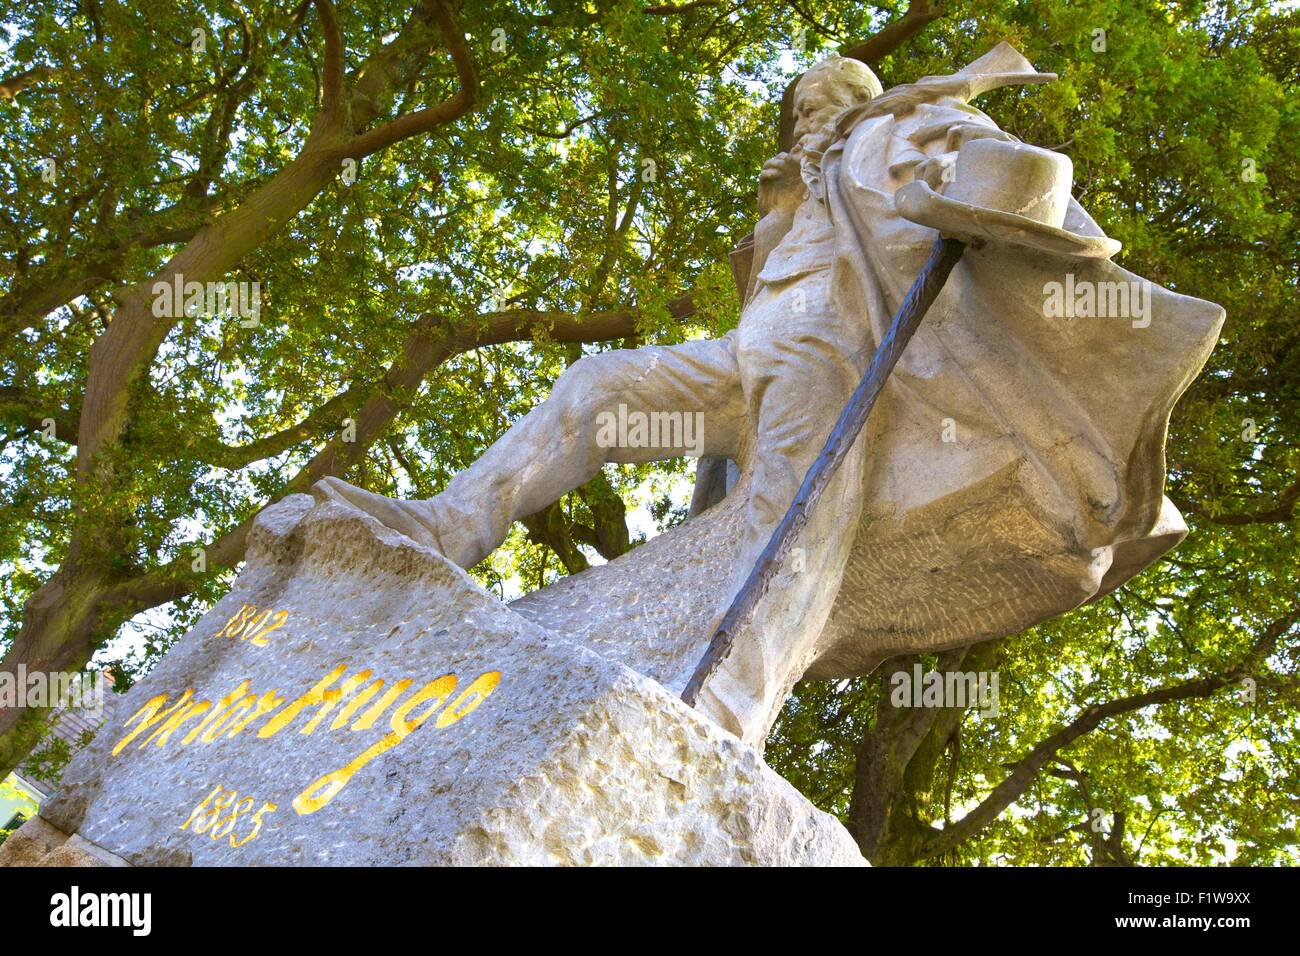 Statua di Victor Hugo, Candie Park, St. Peter Port Guernsey, Isole del Canale Foto Stock